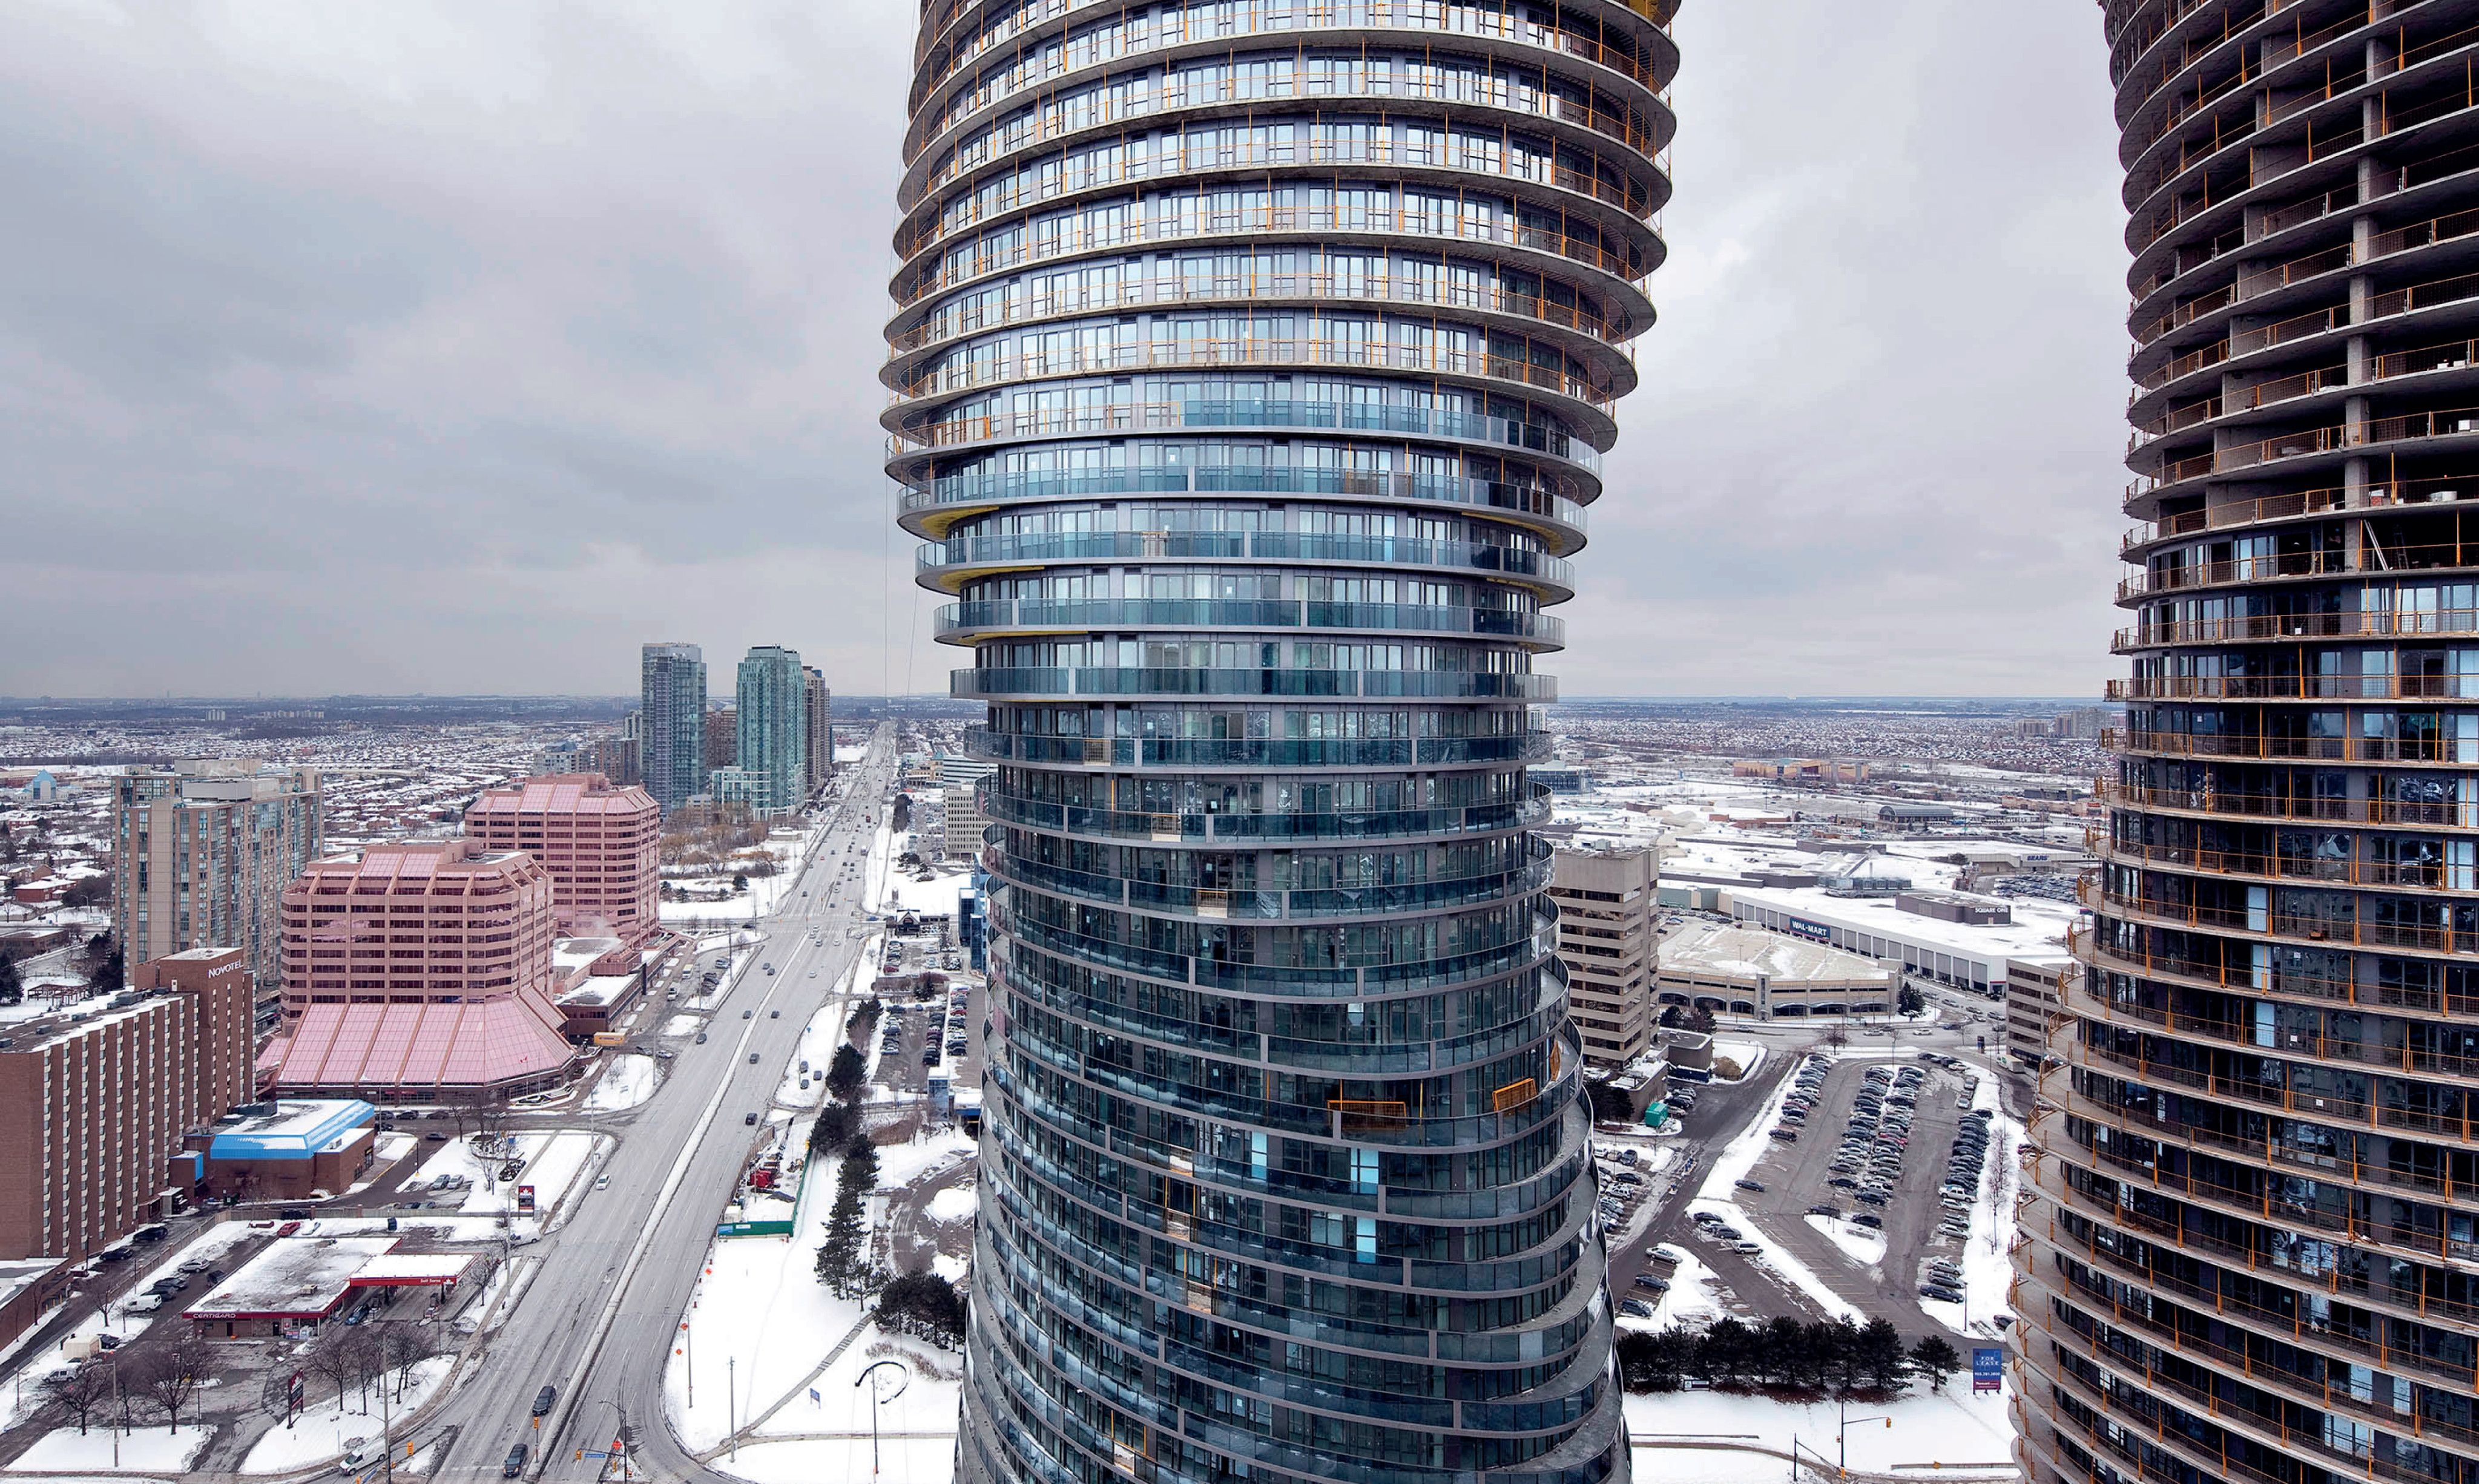 The Absolute Towers in Mississauga, Canada, was the project that first earned MAD Architects worldwide attention, and put Ma Yansong  on the path to becoming one of the most globally known Chinese architects. Photo: Jtravis